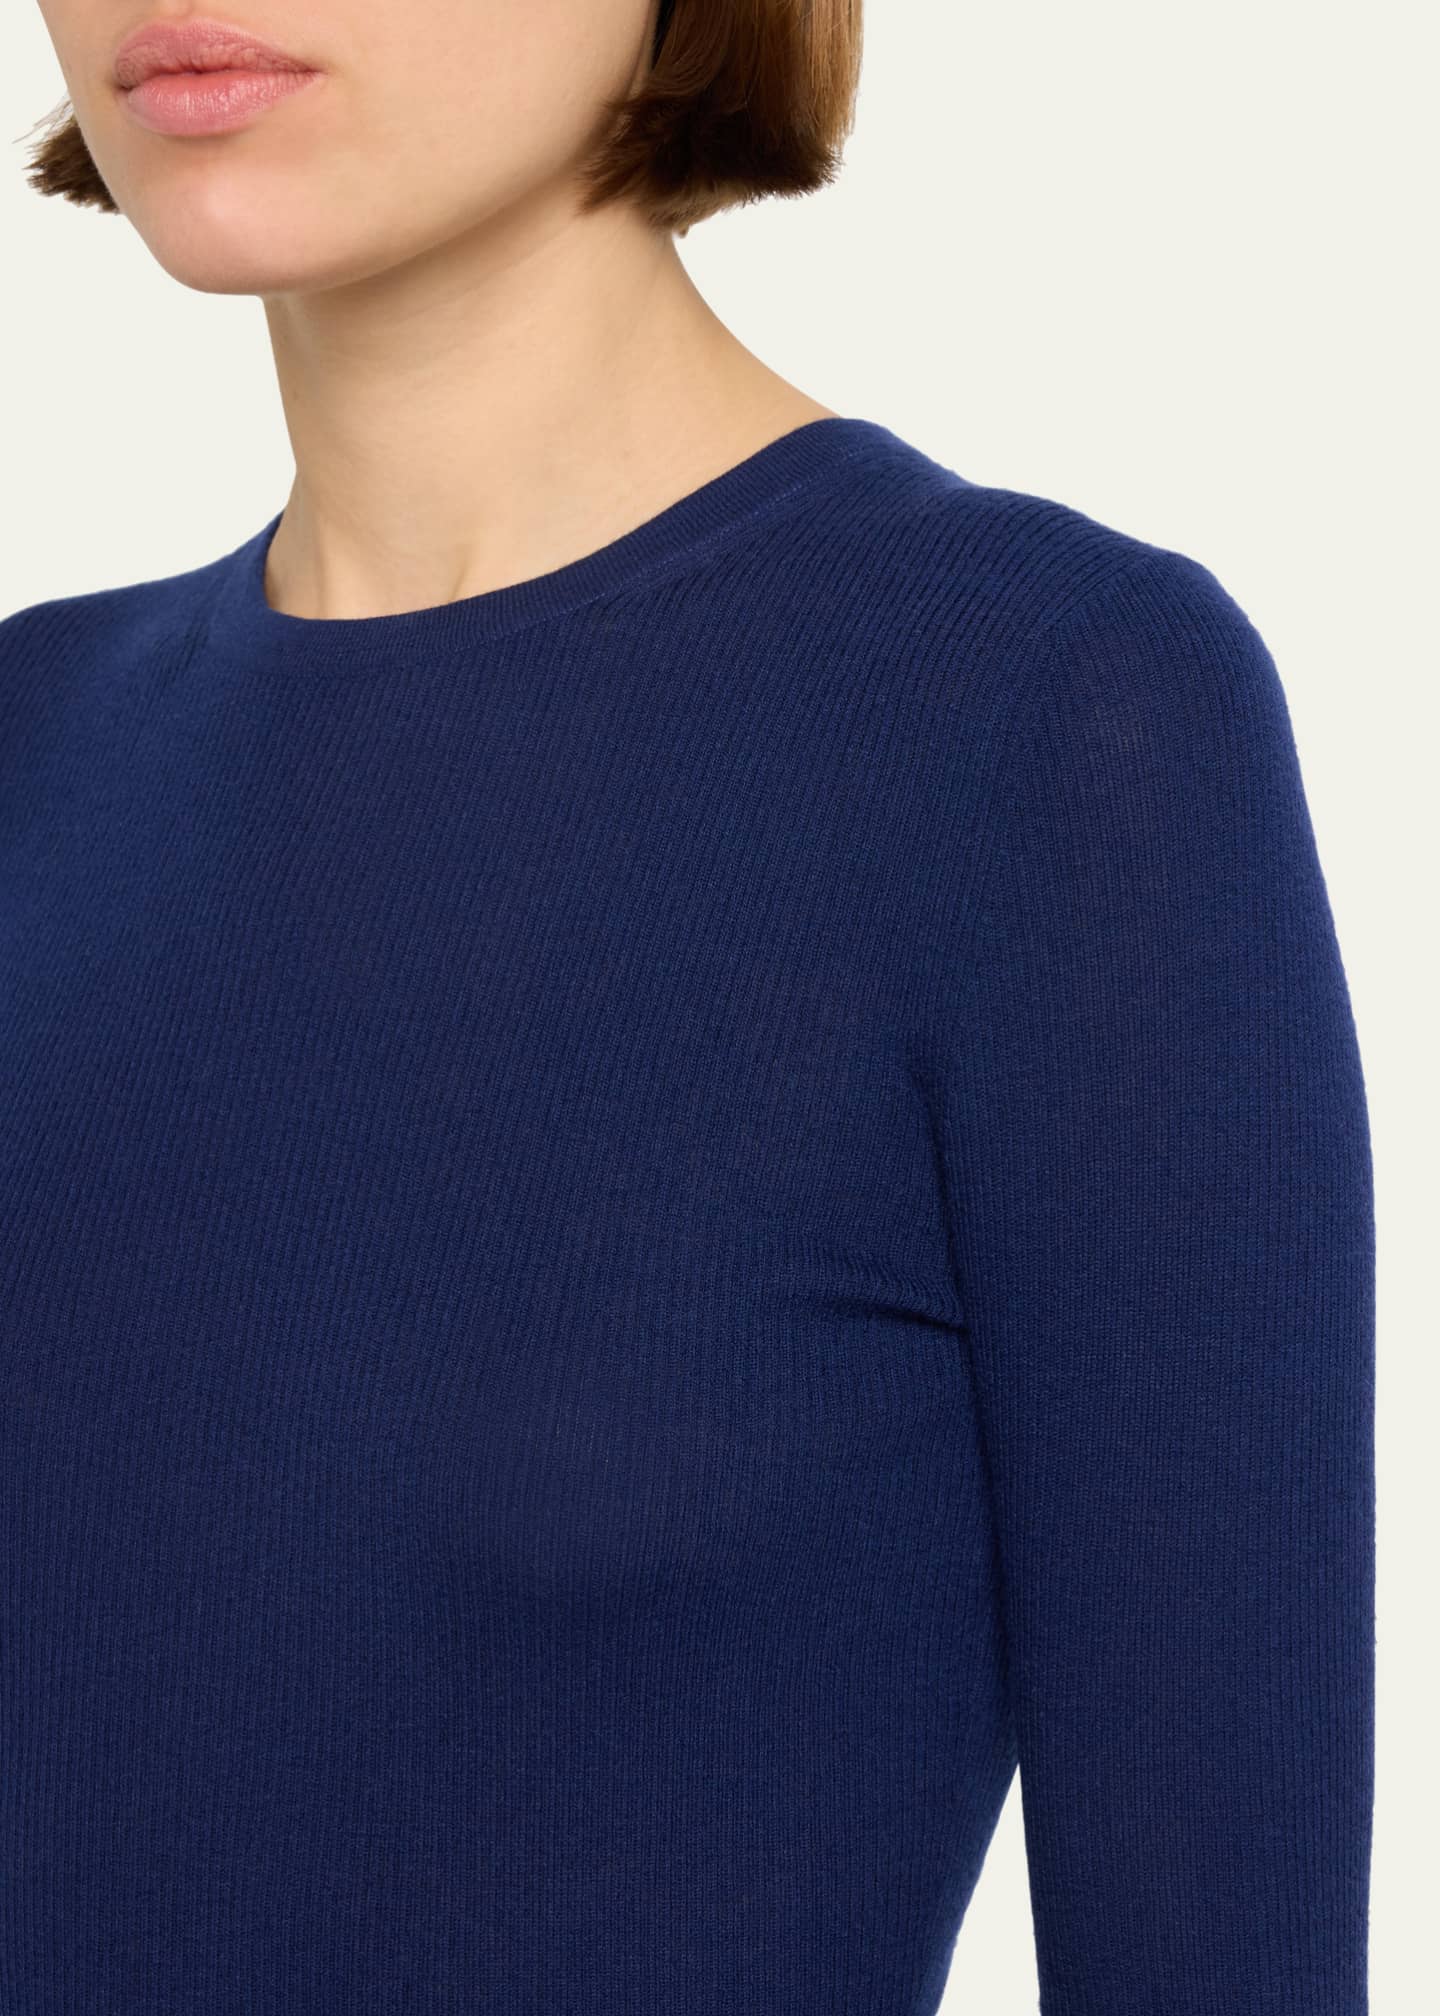 Michael Kors Collection Hutton Ribbed Cashmere Pullover - Bergdorf Goodman